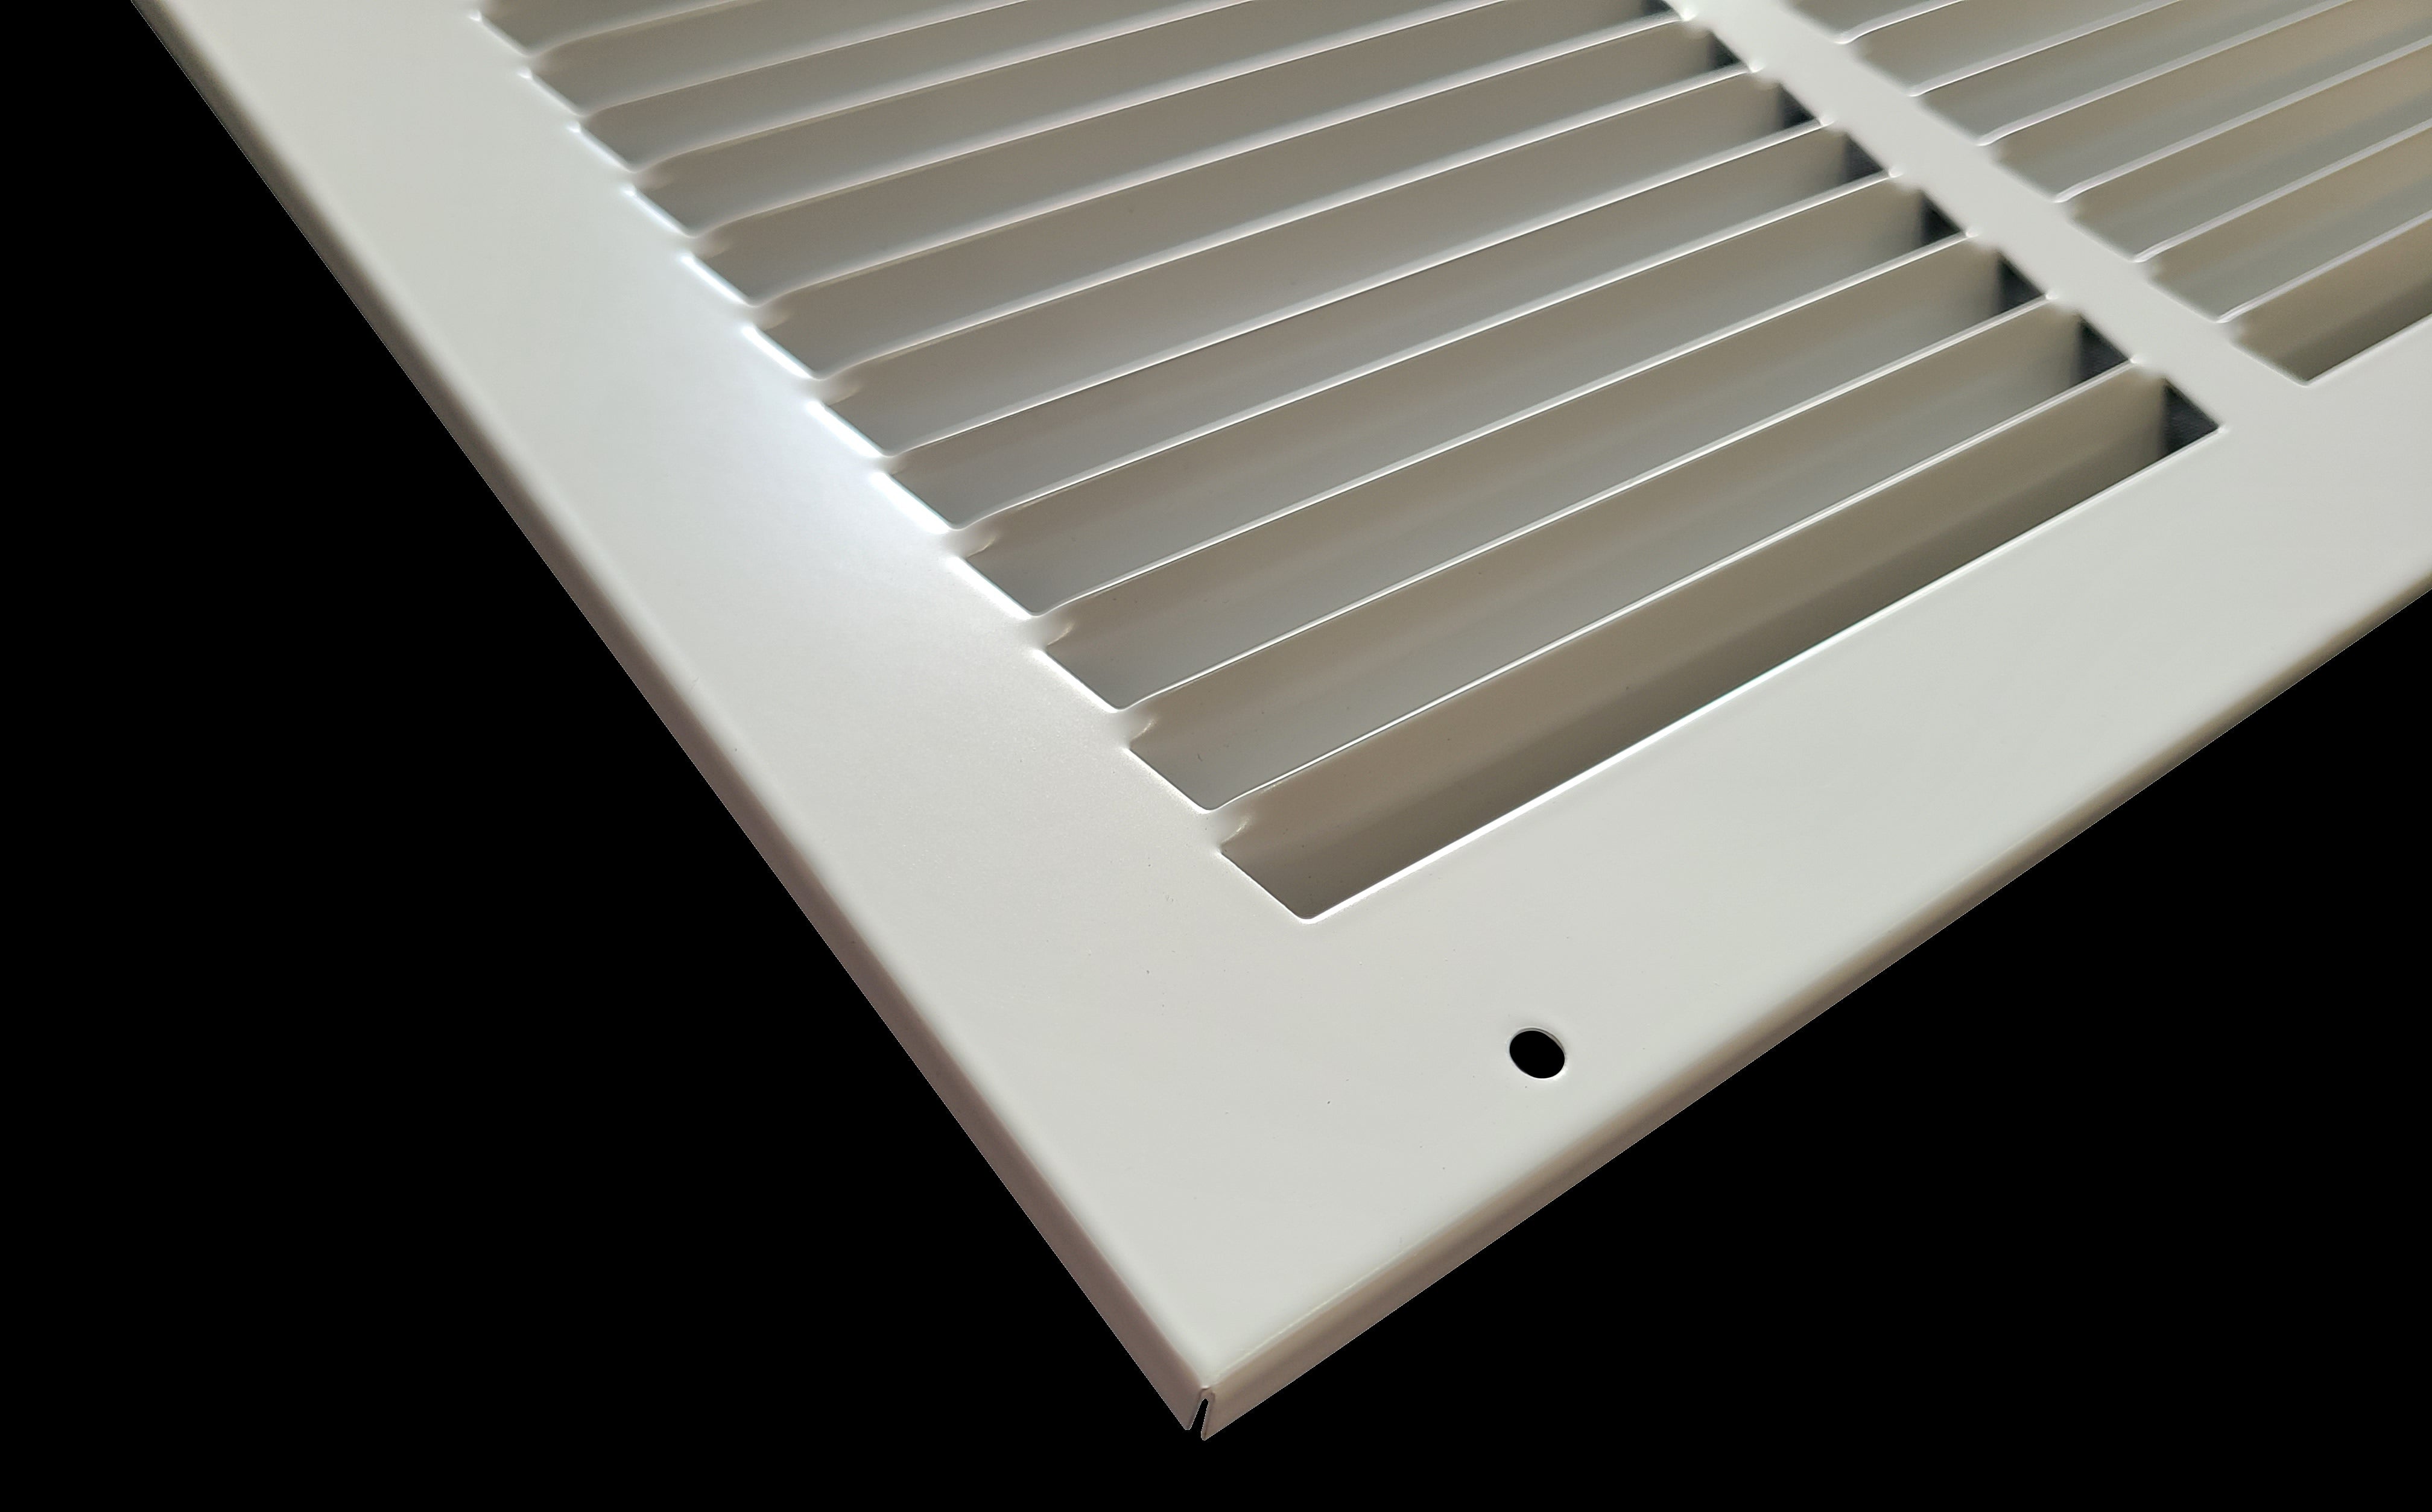 14" X 10" Duct Opening | Steel Return Air Grille for Sidewall and Ceiling | Outer Dimensions: 15.75"W X 11.75"H